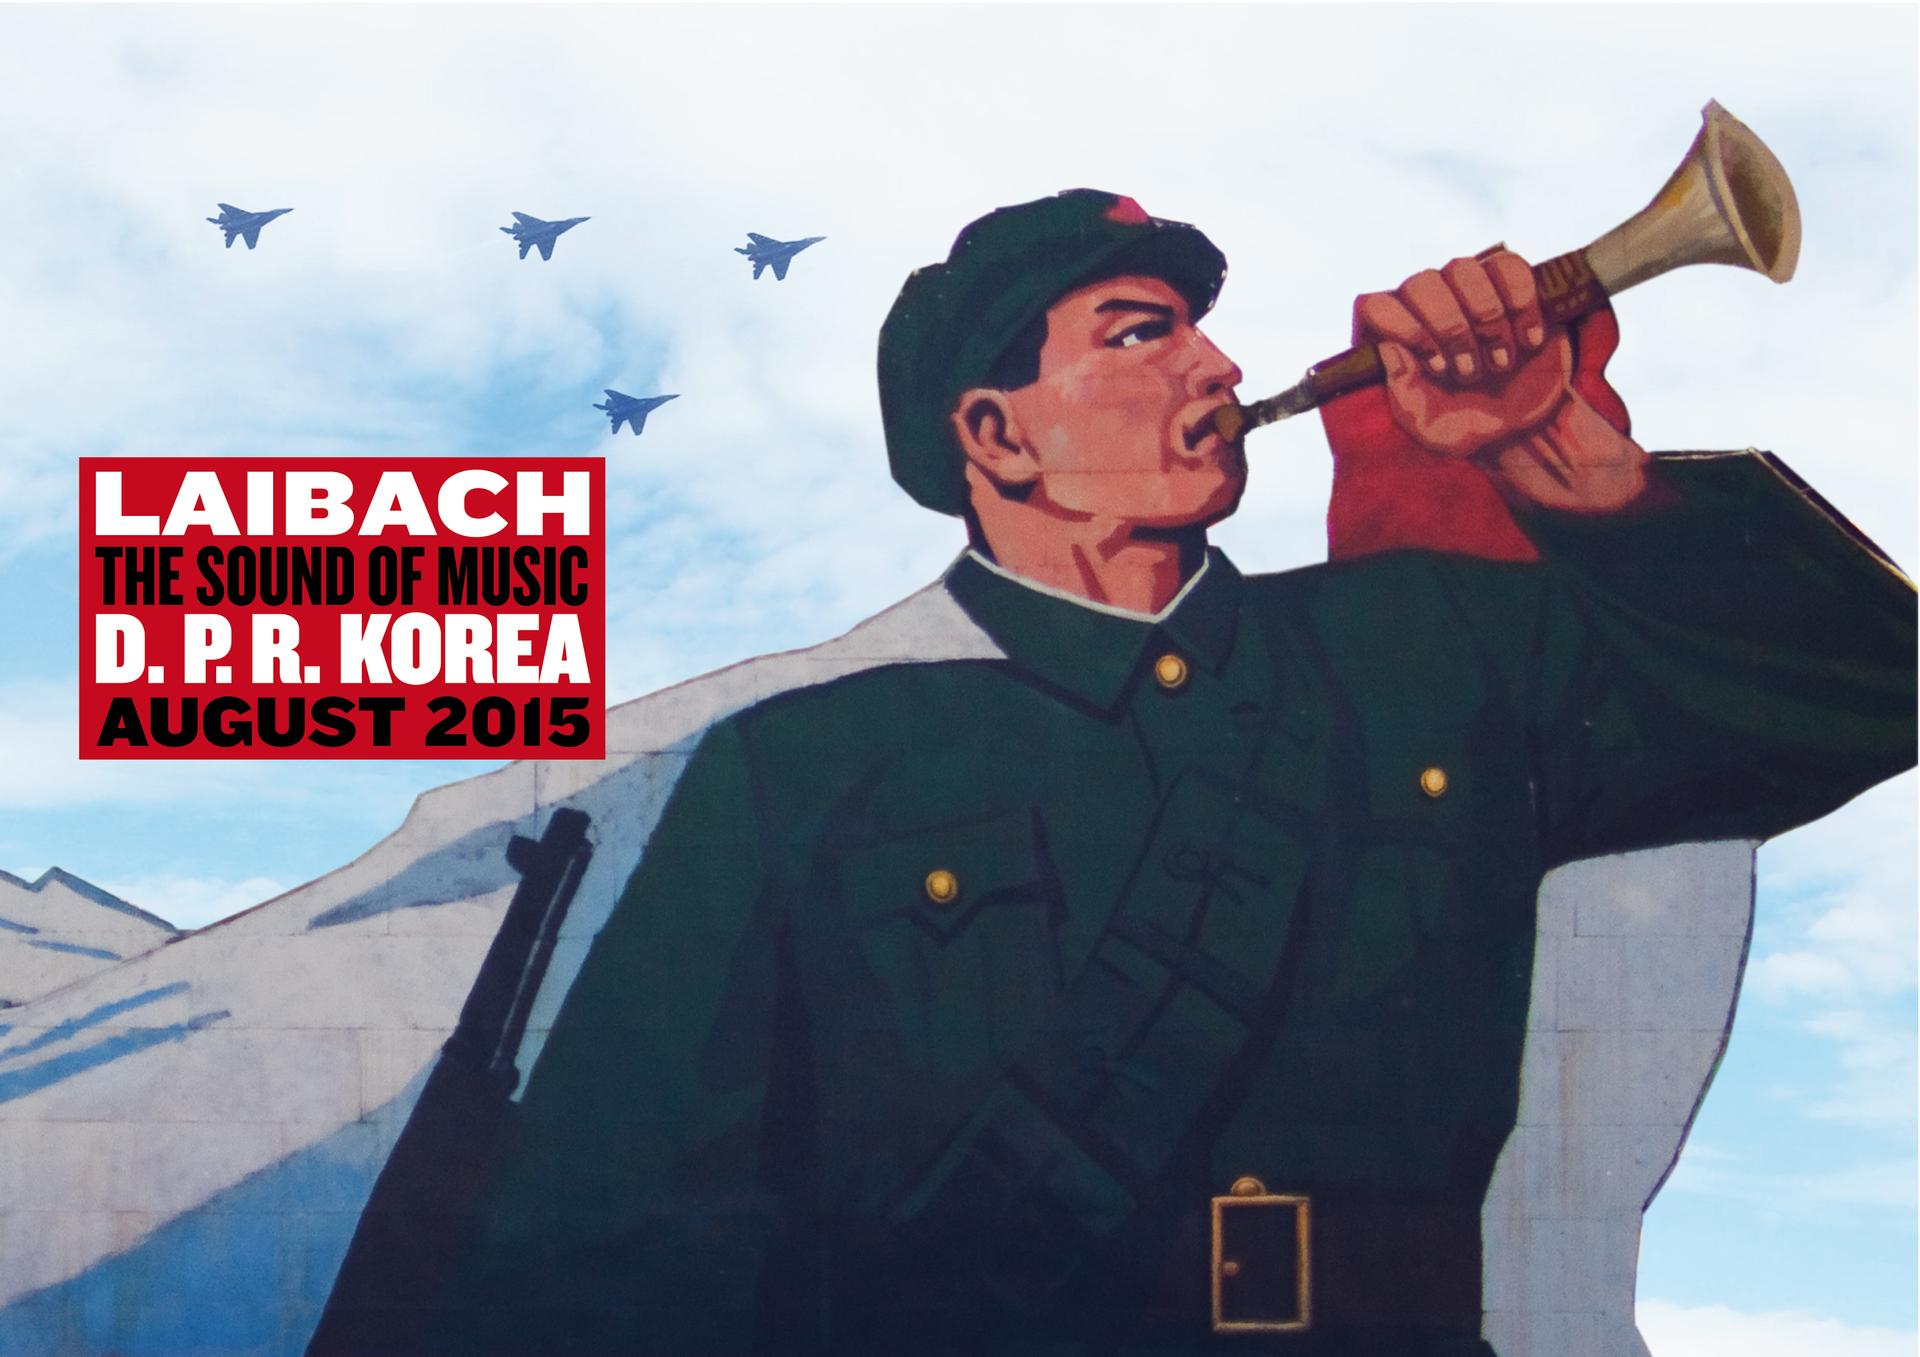 Laibach played covers from The Sound of Music at its 2015 concert in Pyongyang.